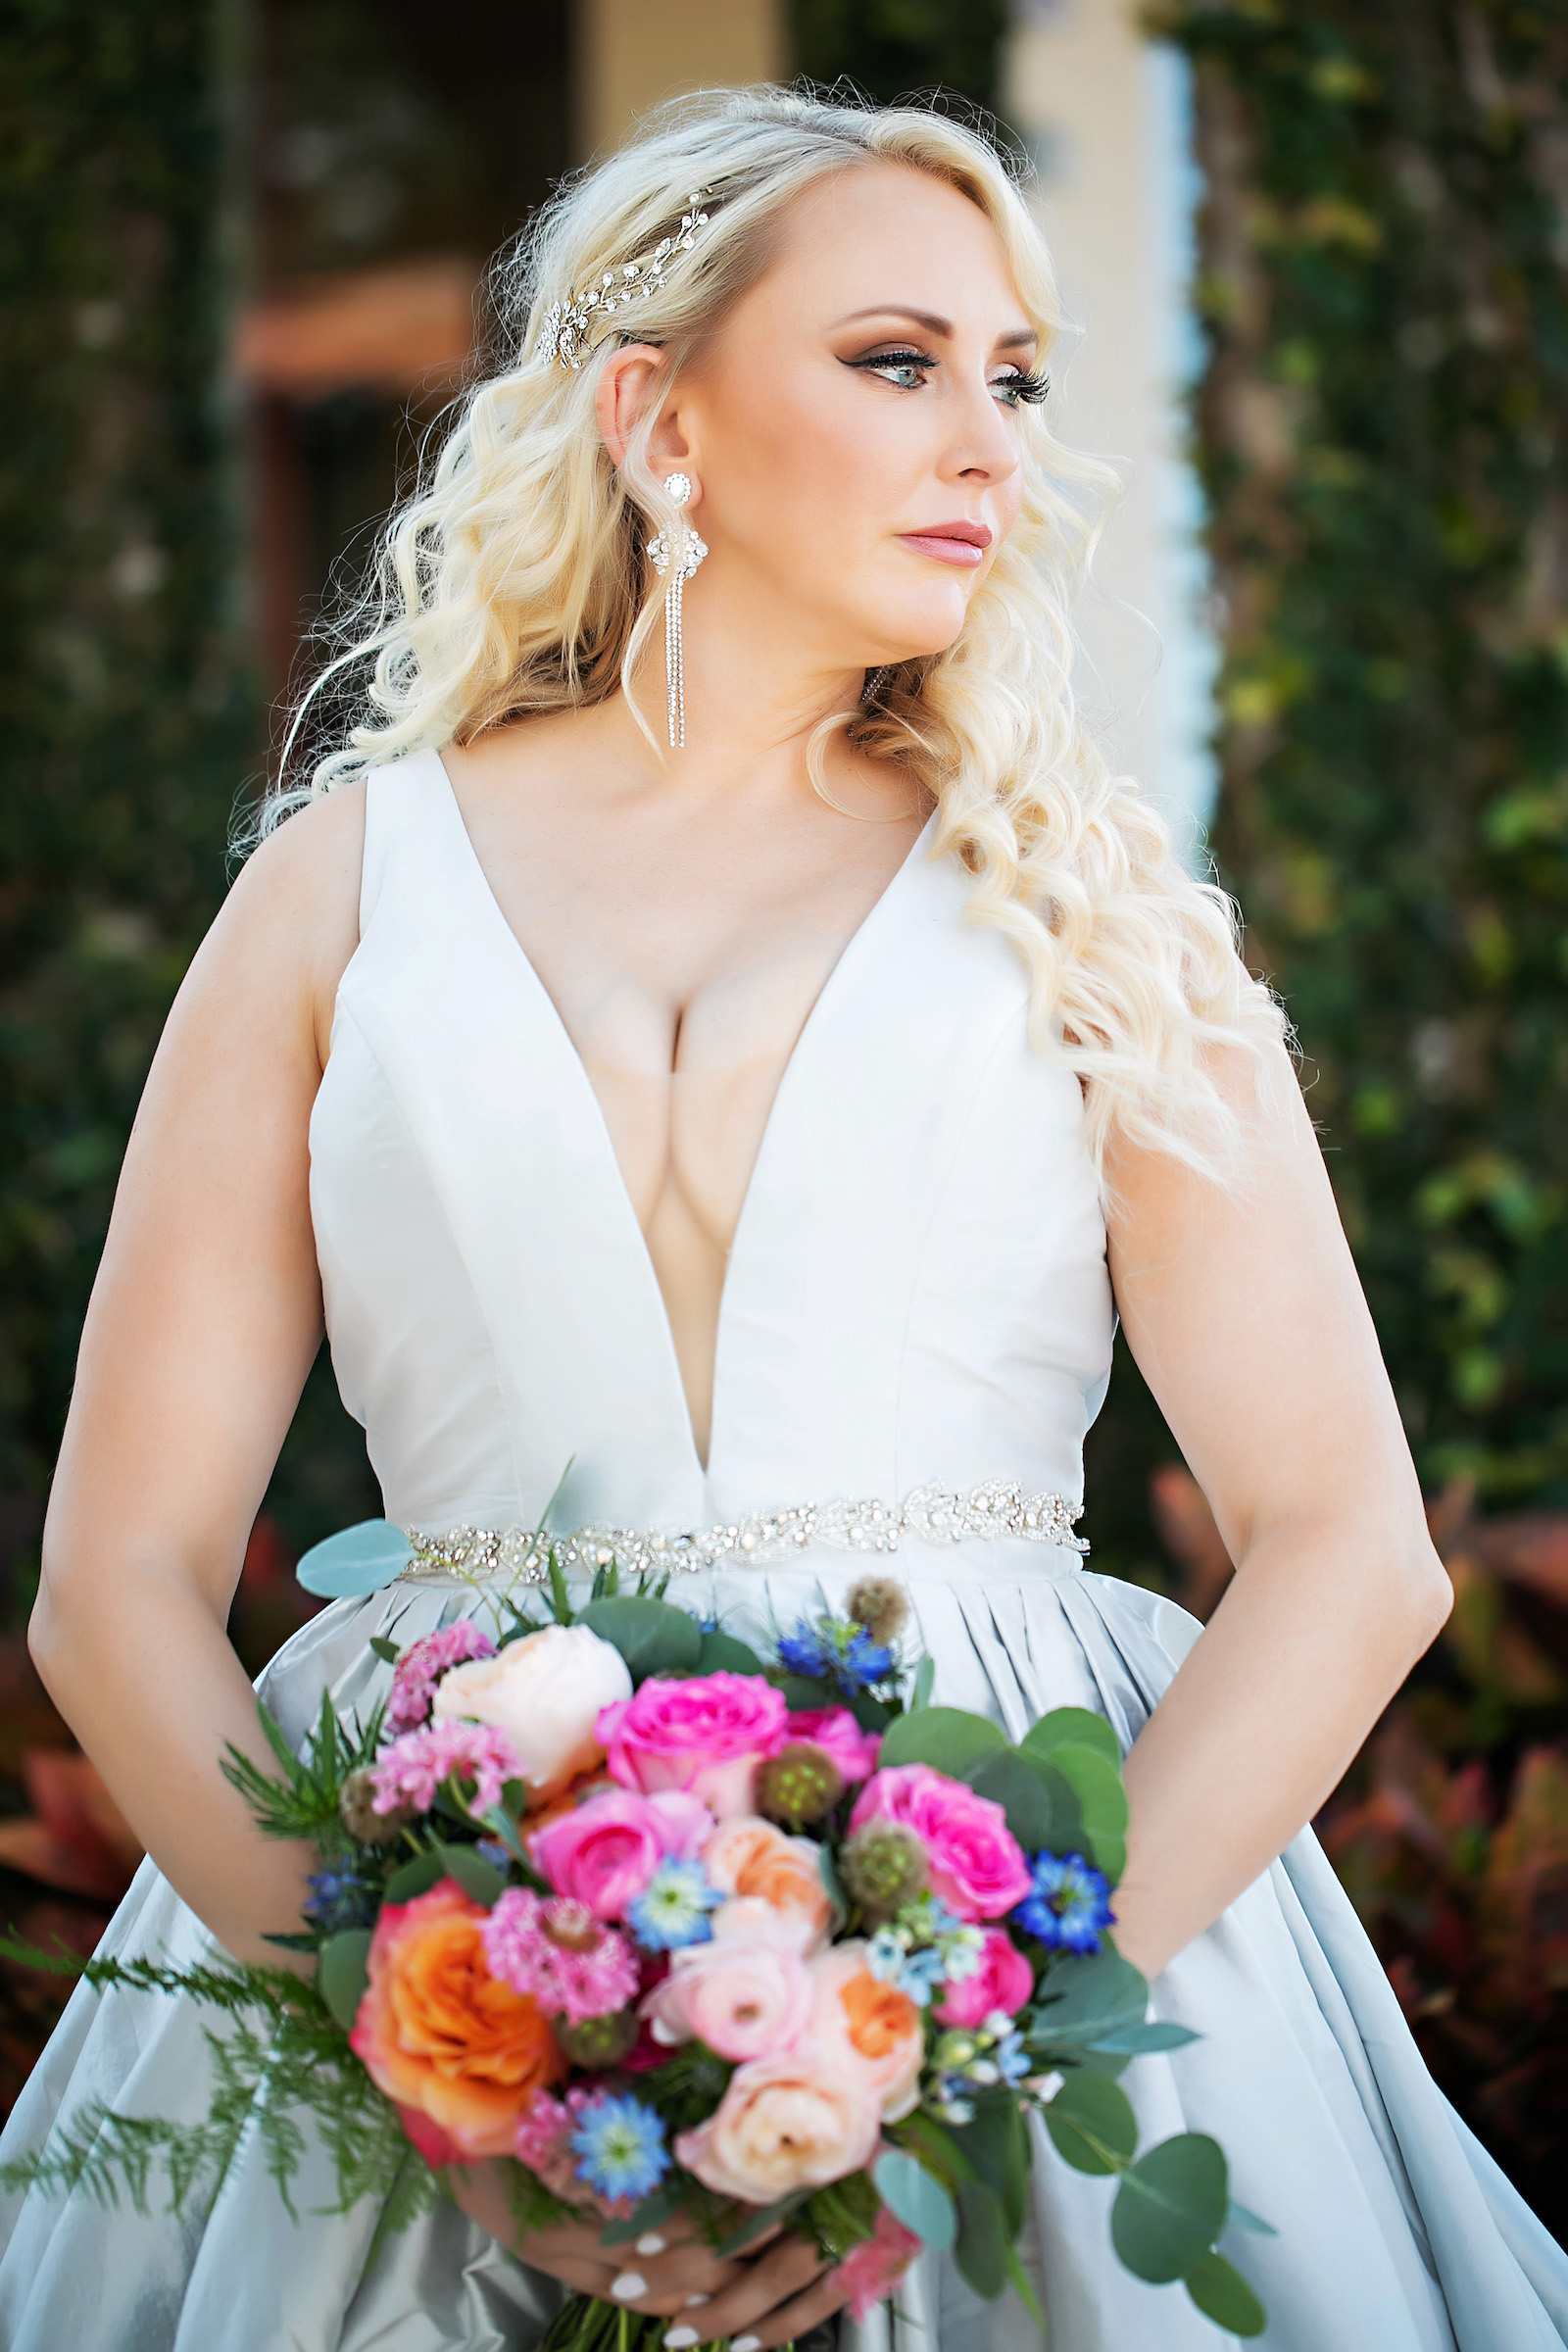 Bride with Classic Smokey Eye and Soft Curl Hair Down Bridal Look and Bright Orange and Pink Floral Bouquet with Greenery in Deep V Classic Wedding Ballgown Portrait | Florida Hair and Makeup Artist Femme Akoi